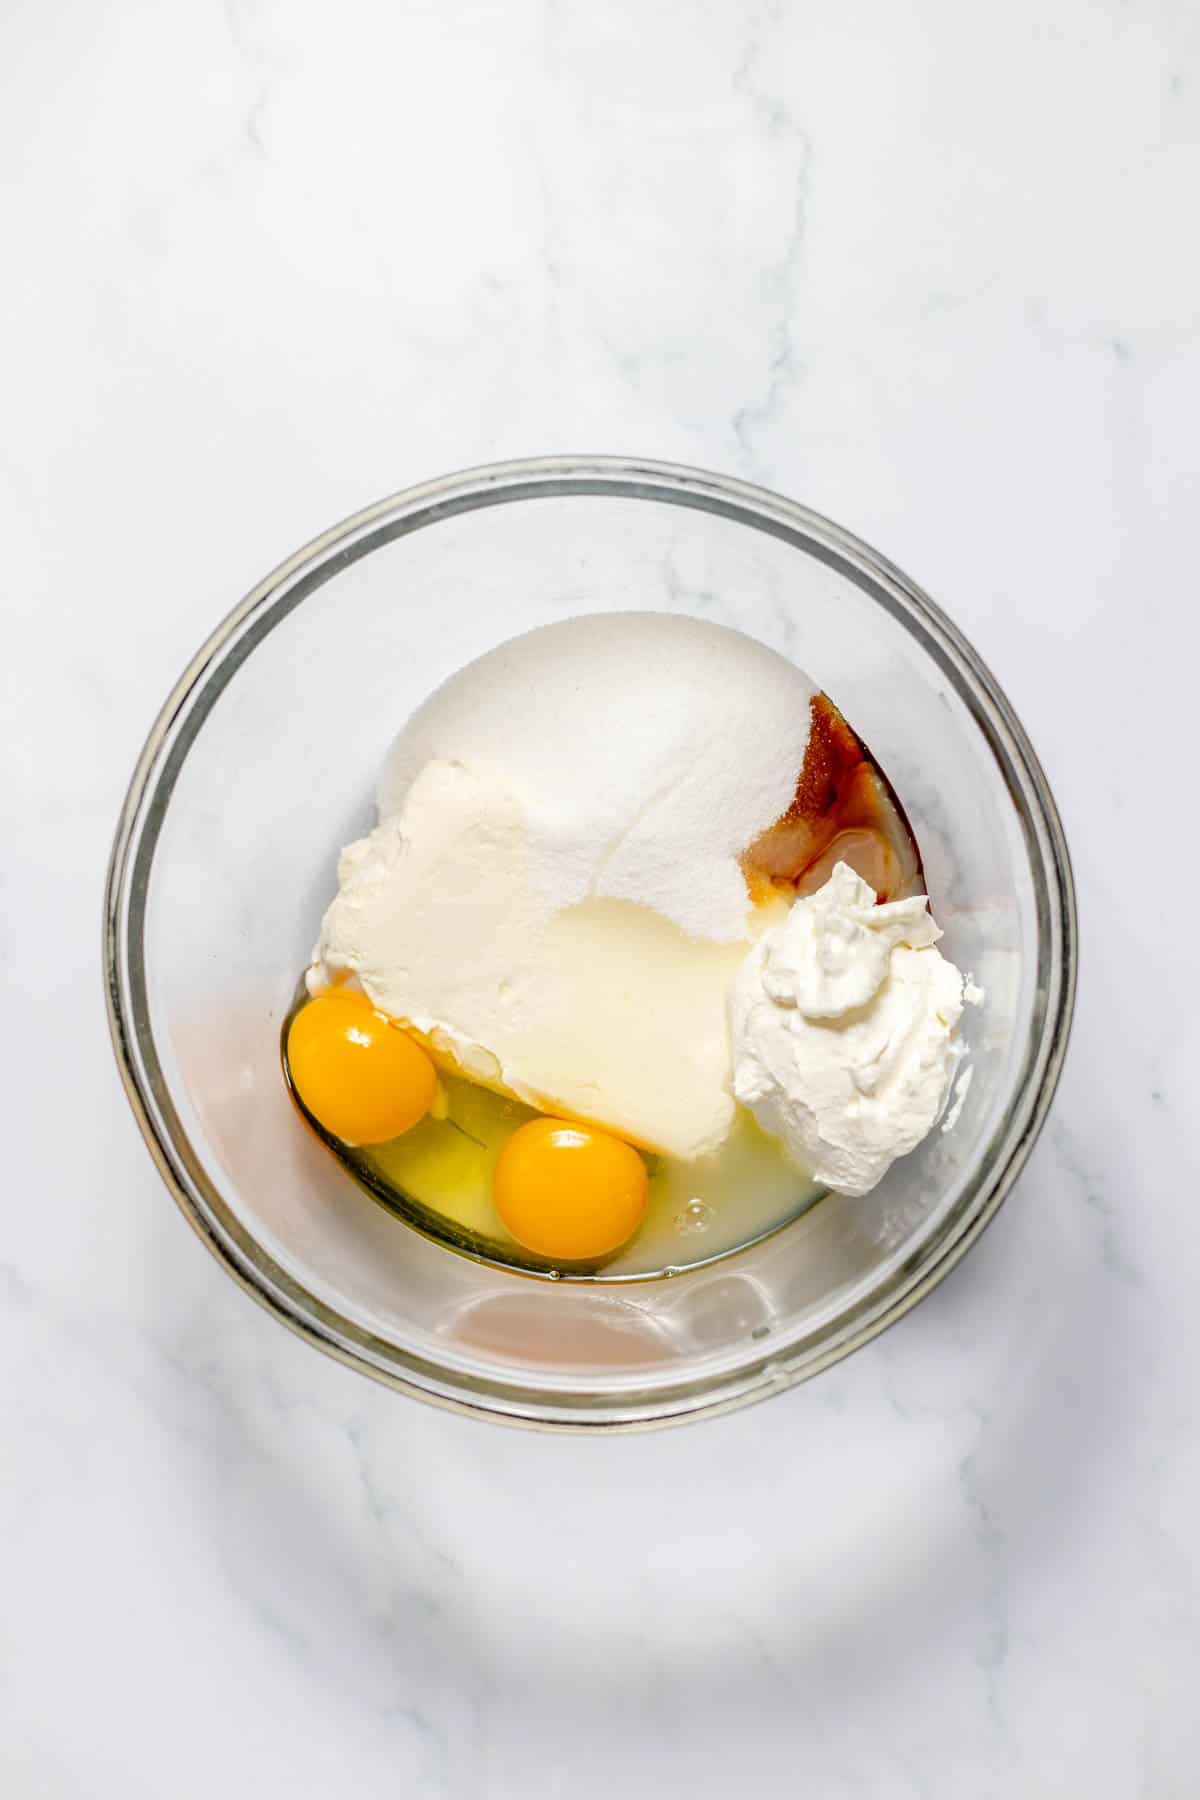 Combining cream cheese, sugar, eggs, vanilla, and sour cream in a glass mixing bowl.